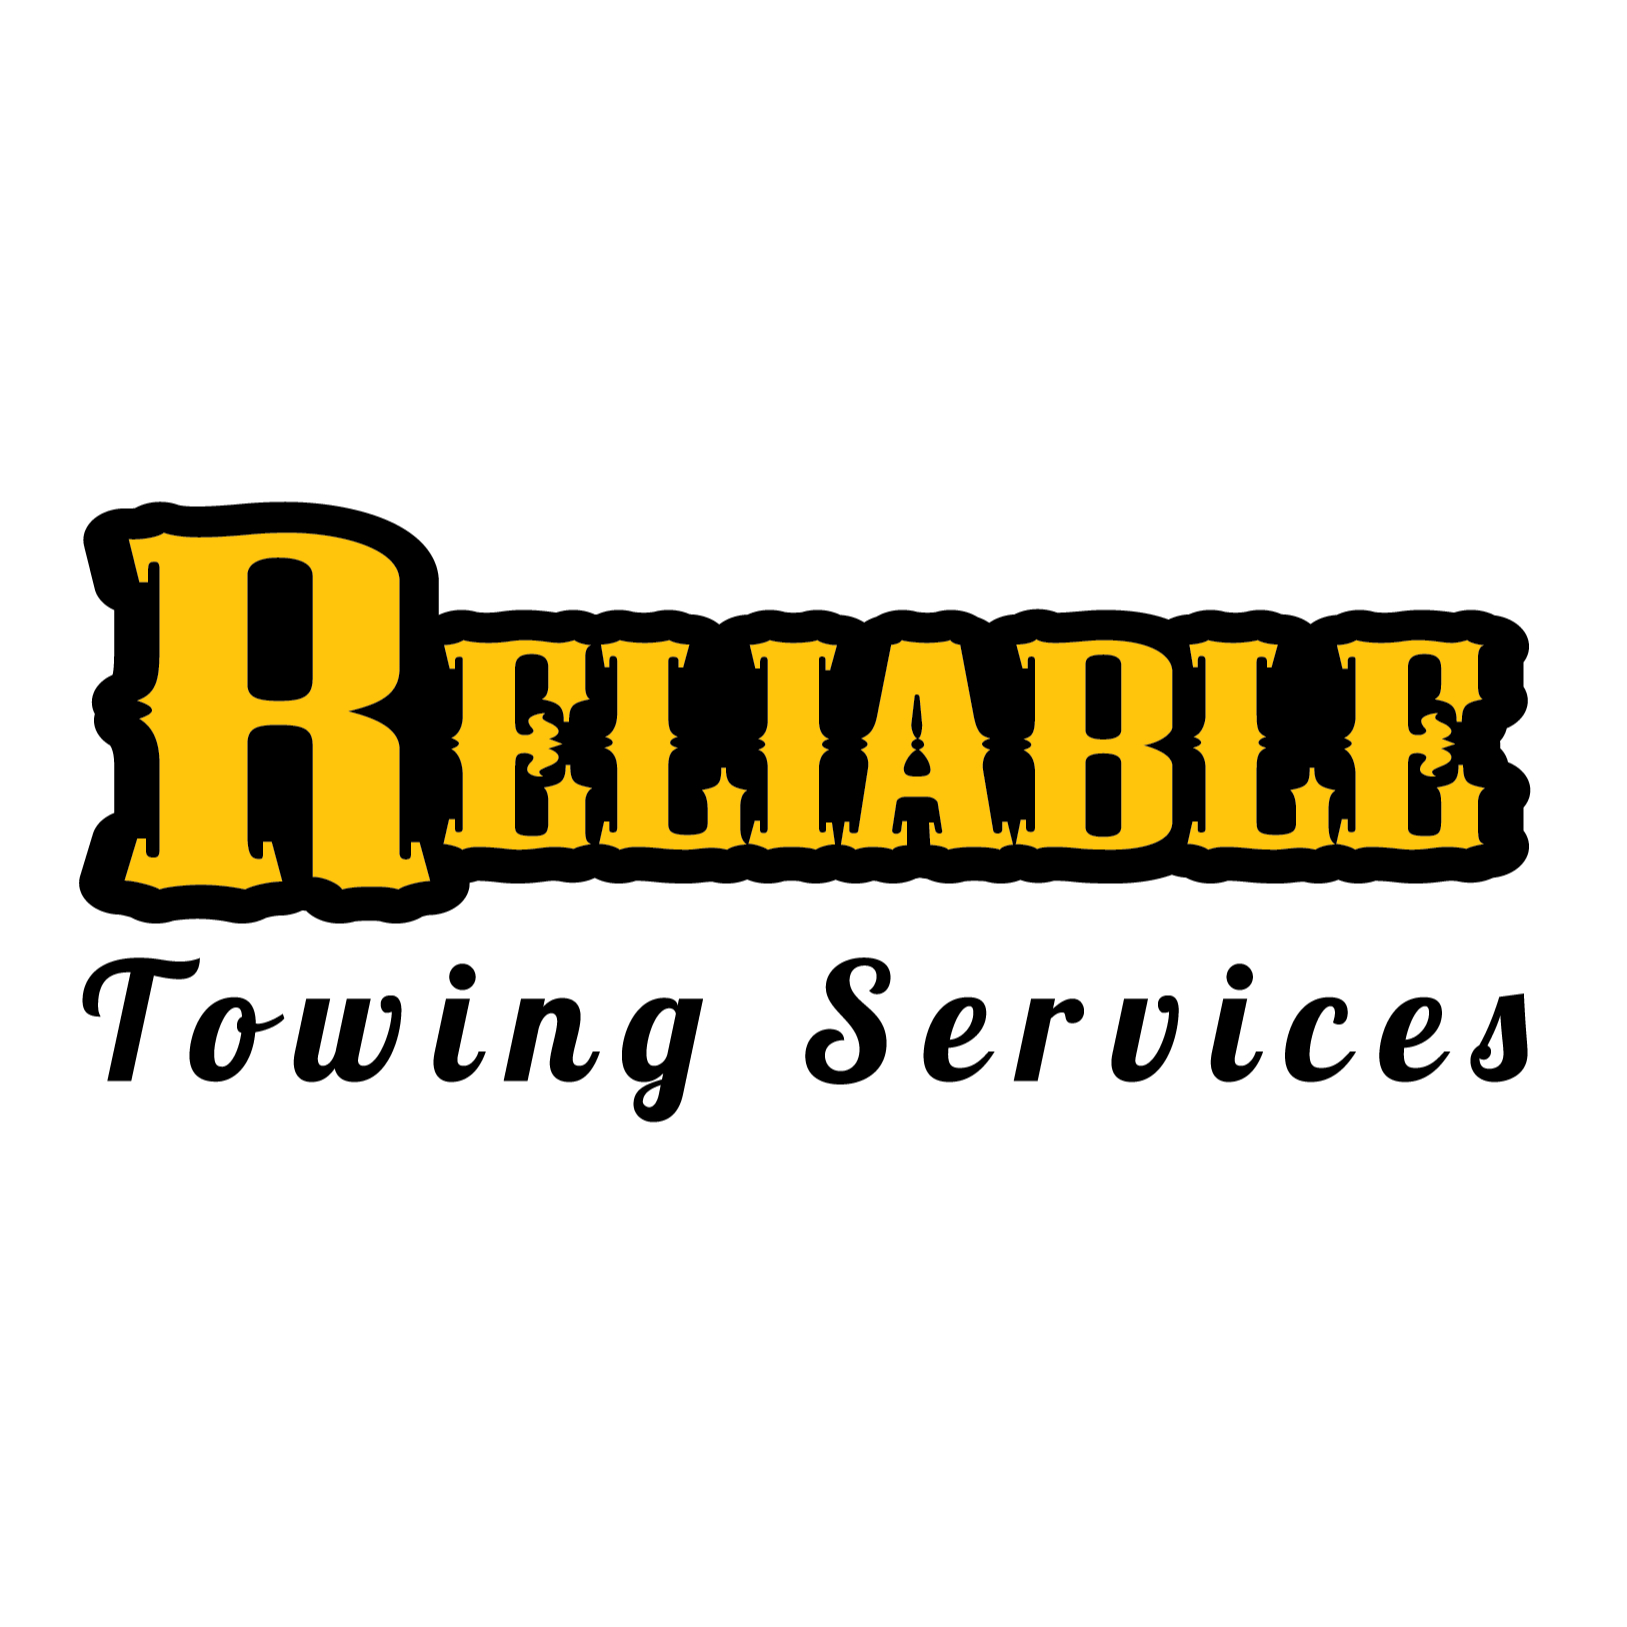 Reliable Towing Services - Vehicle Towing